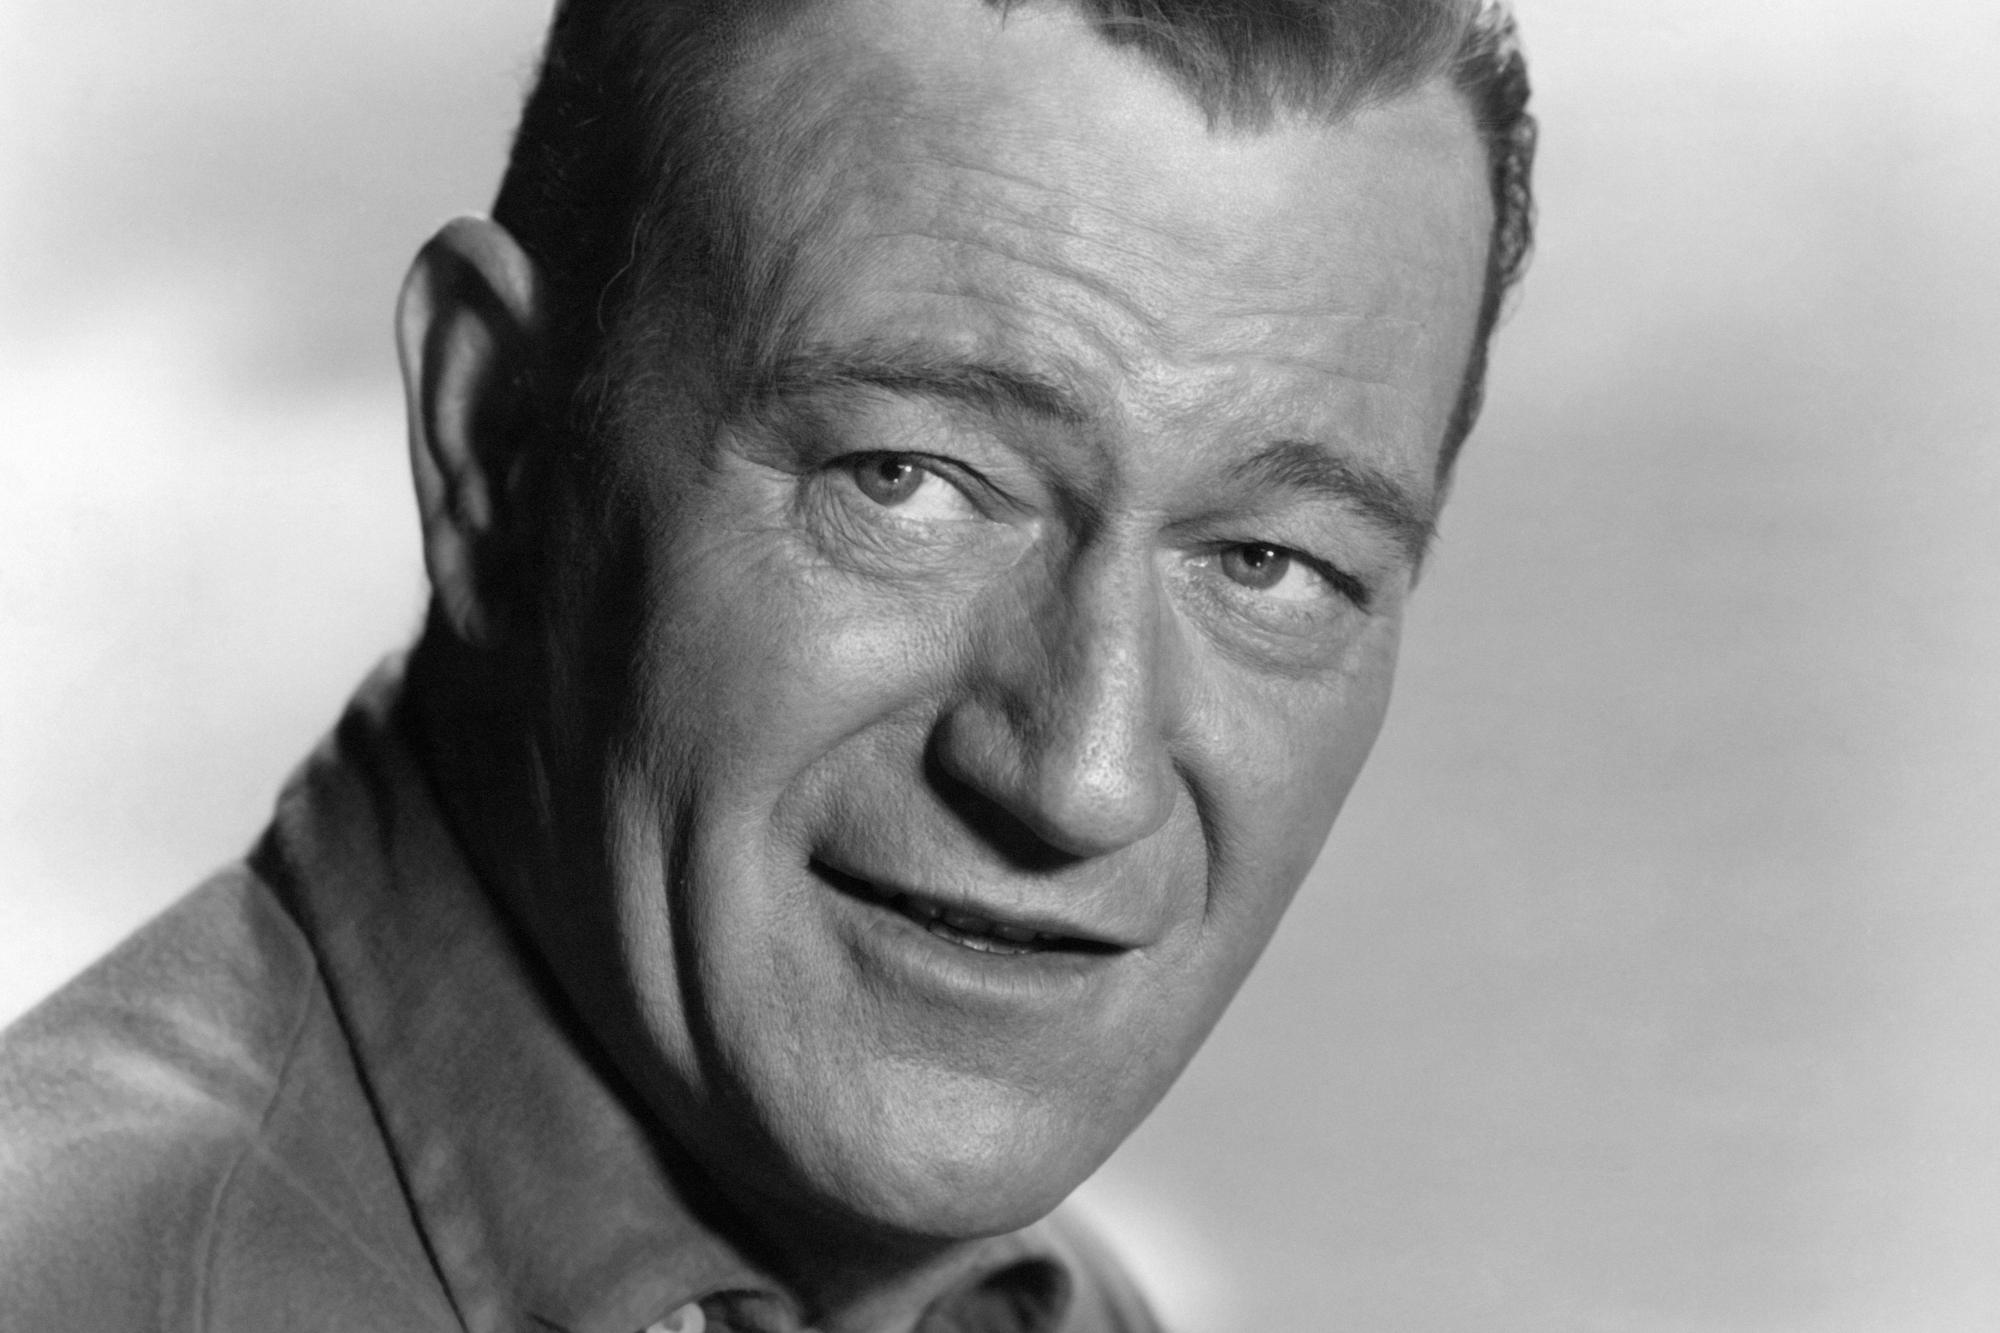 John Wayne, who didn't like 'The Wild Bunch.' He's smiling in a black-and-white portrait.